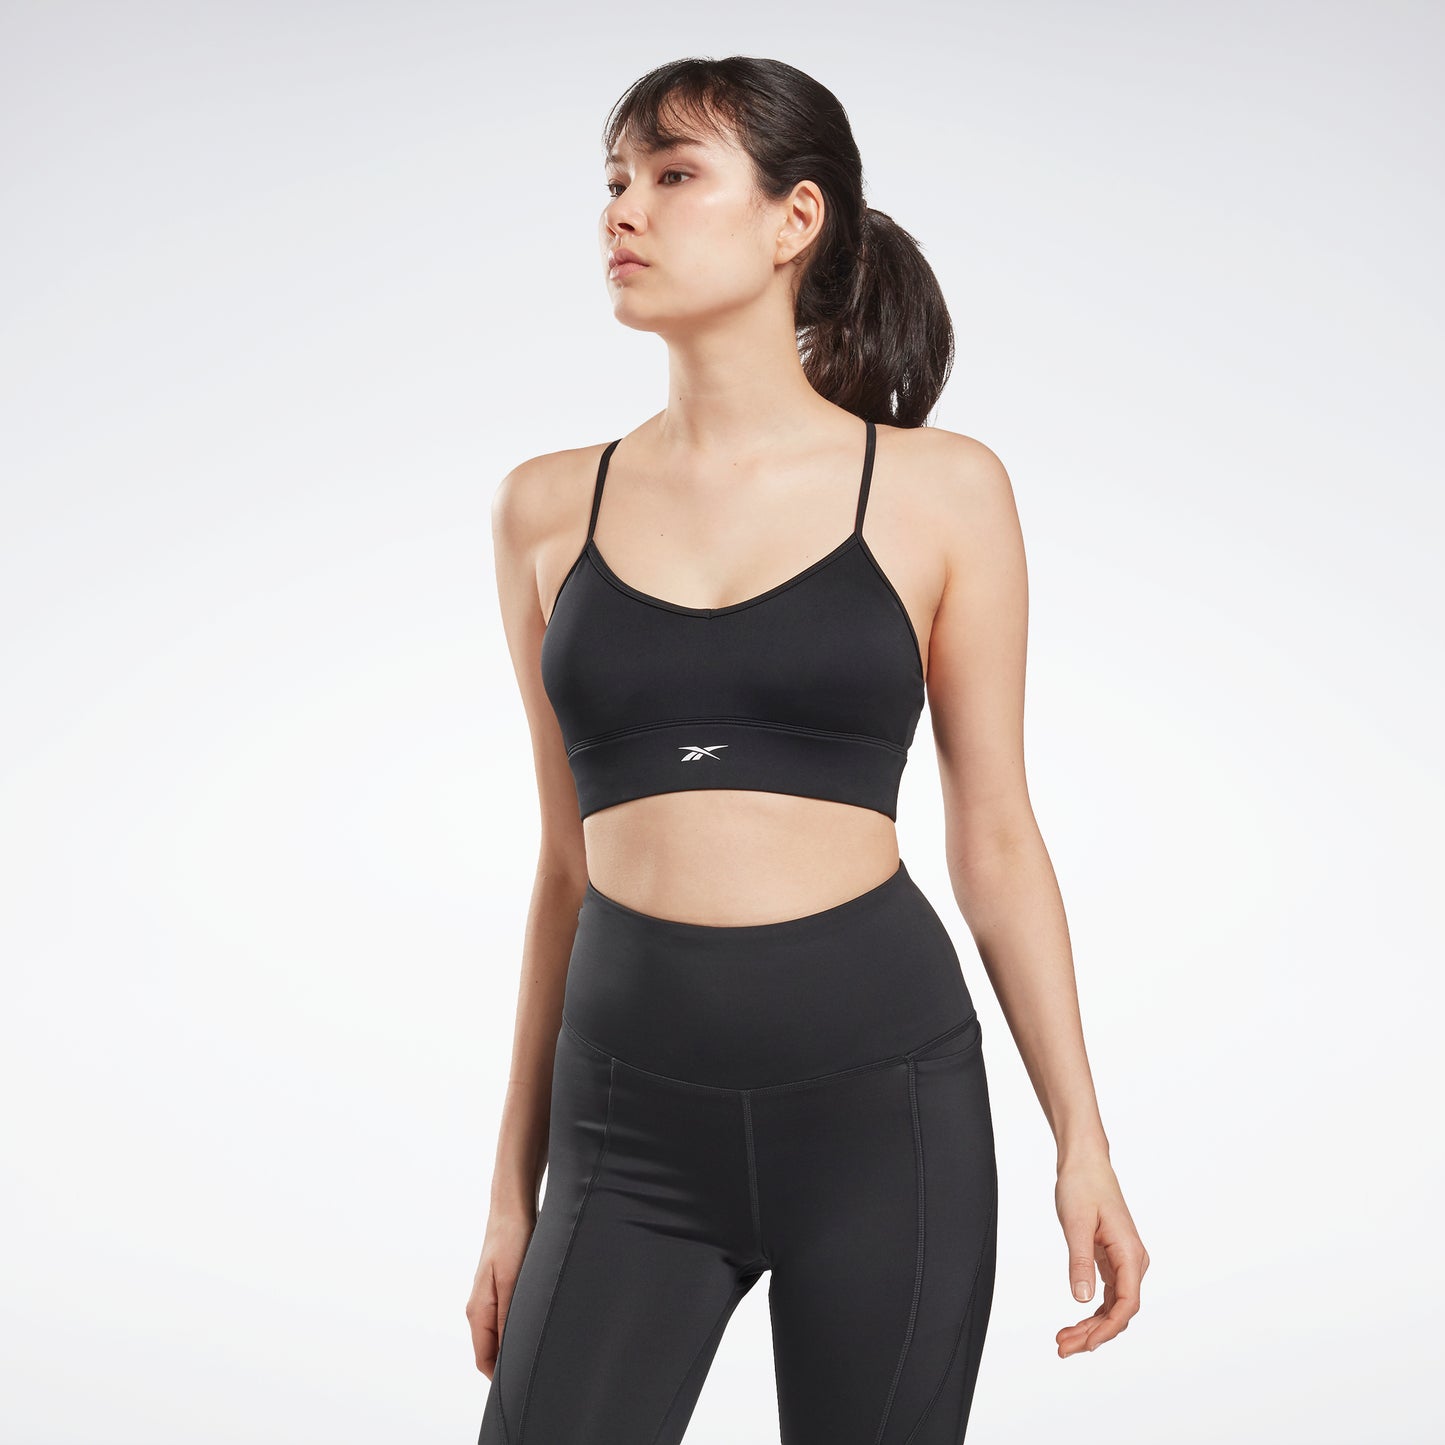 Reebok Sports bras, Perfect support when playing sports